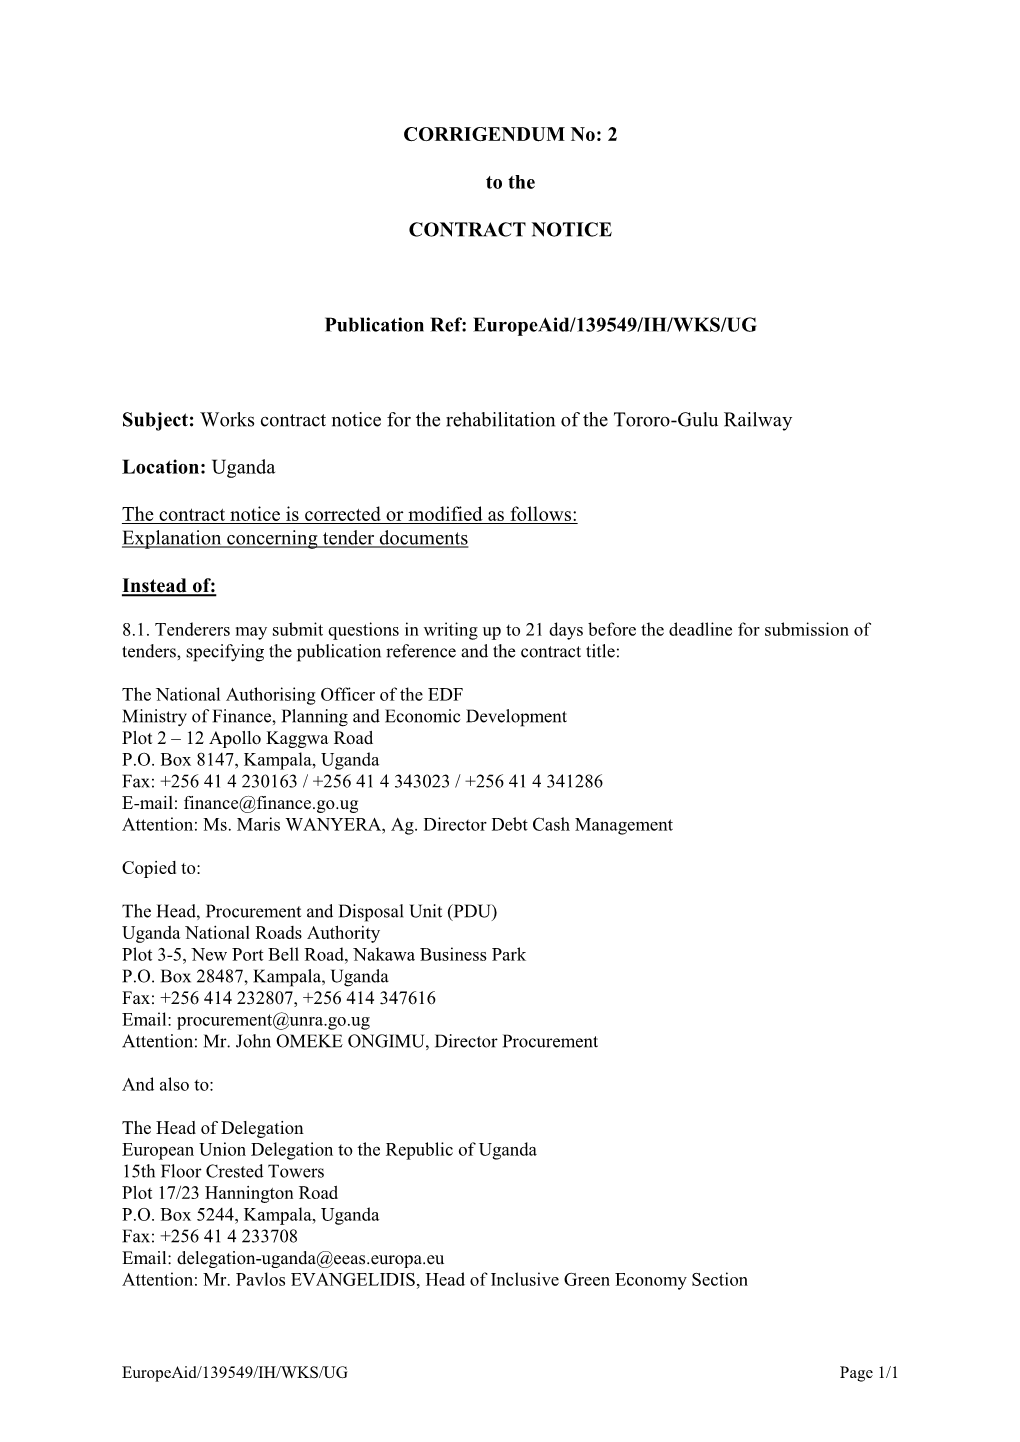 Europeaid/139549/IH/WKS/UG Subject: Works Contract Notice for The